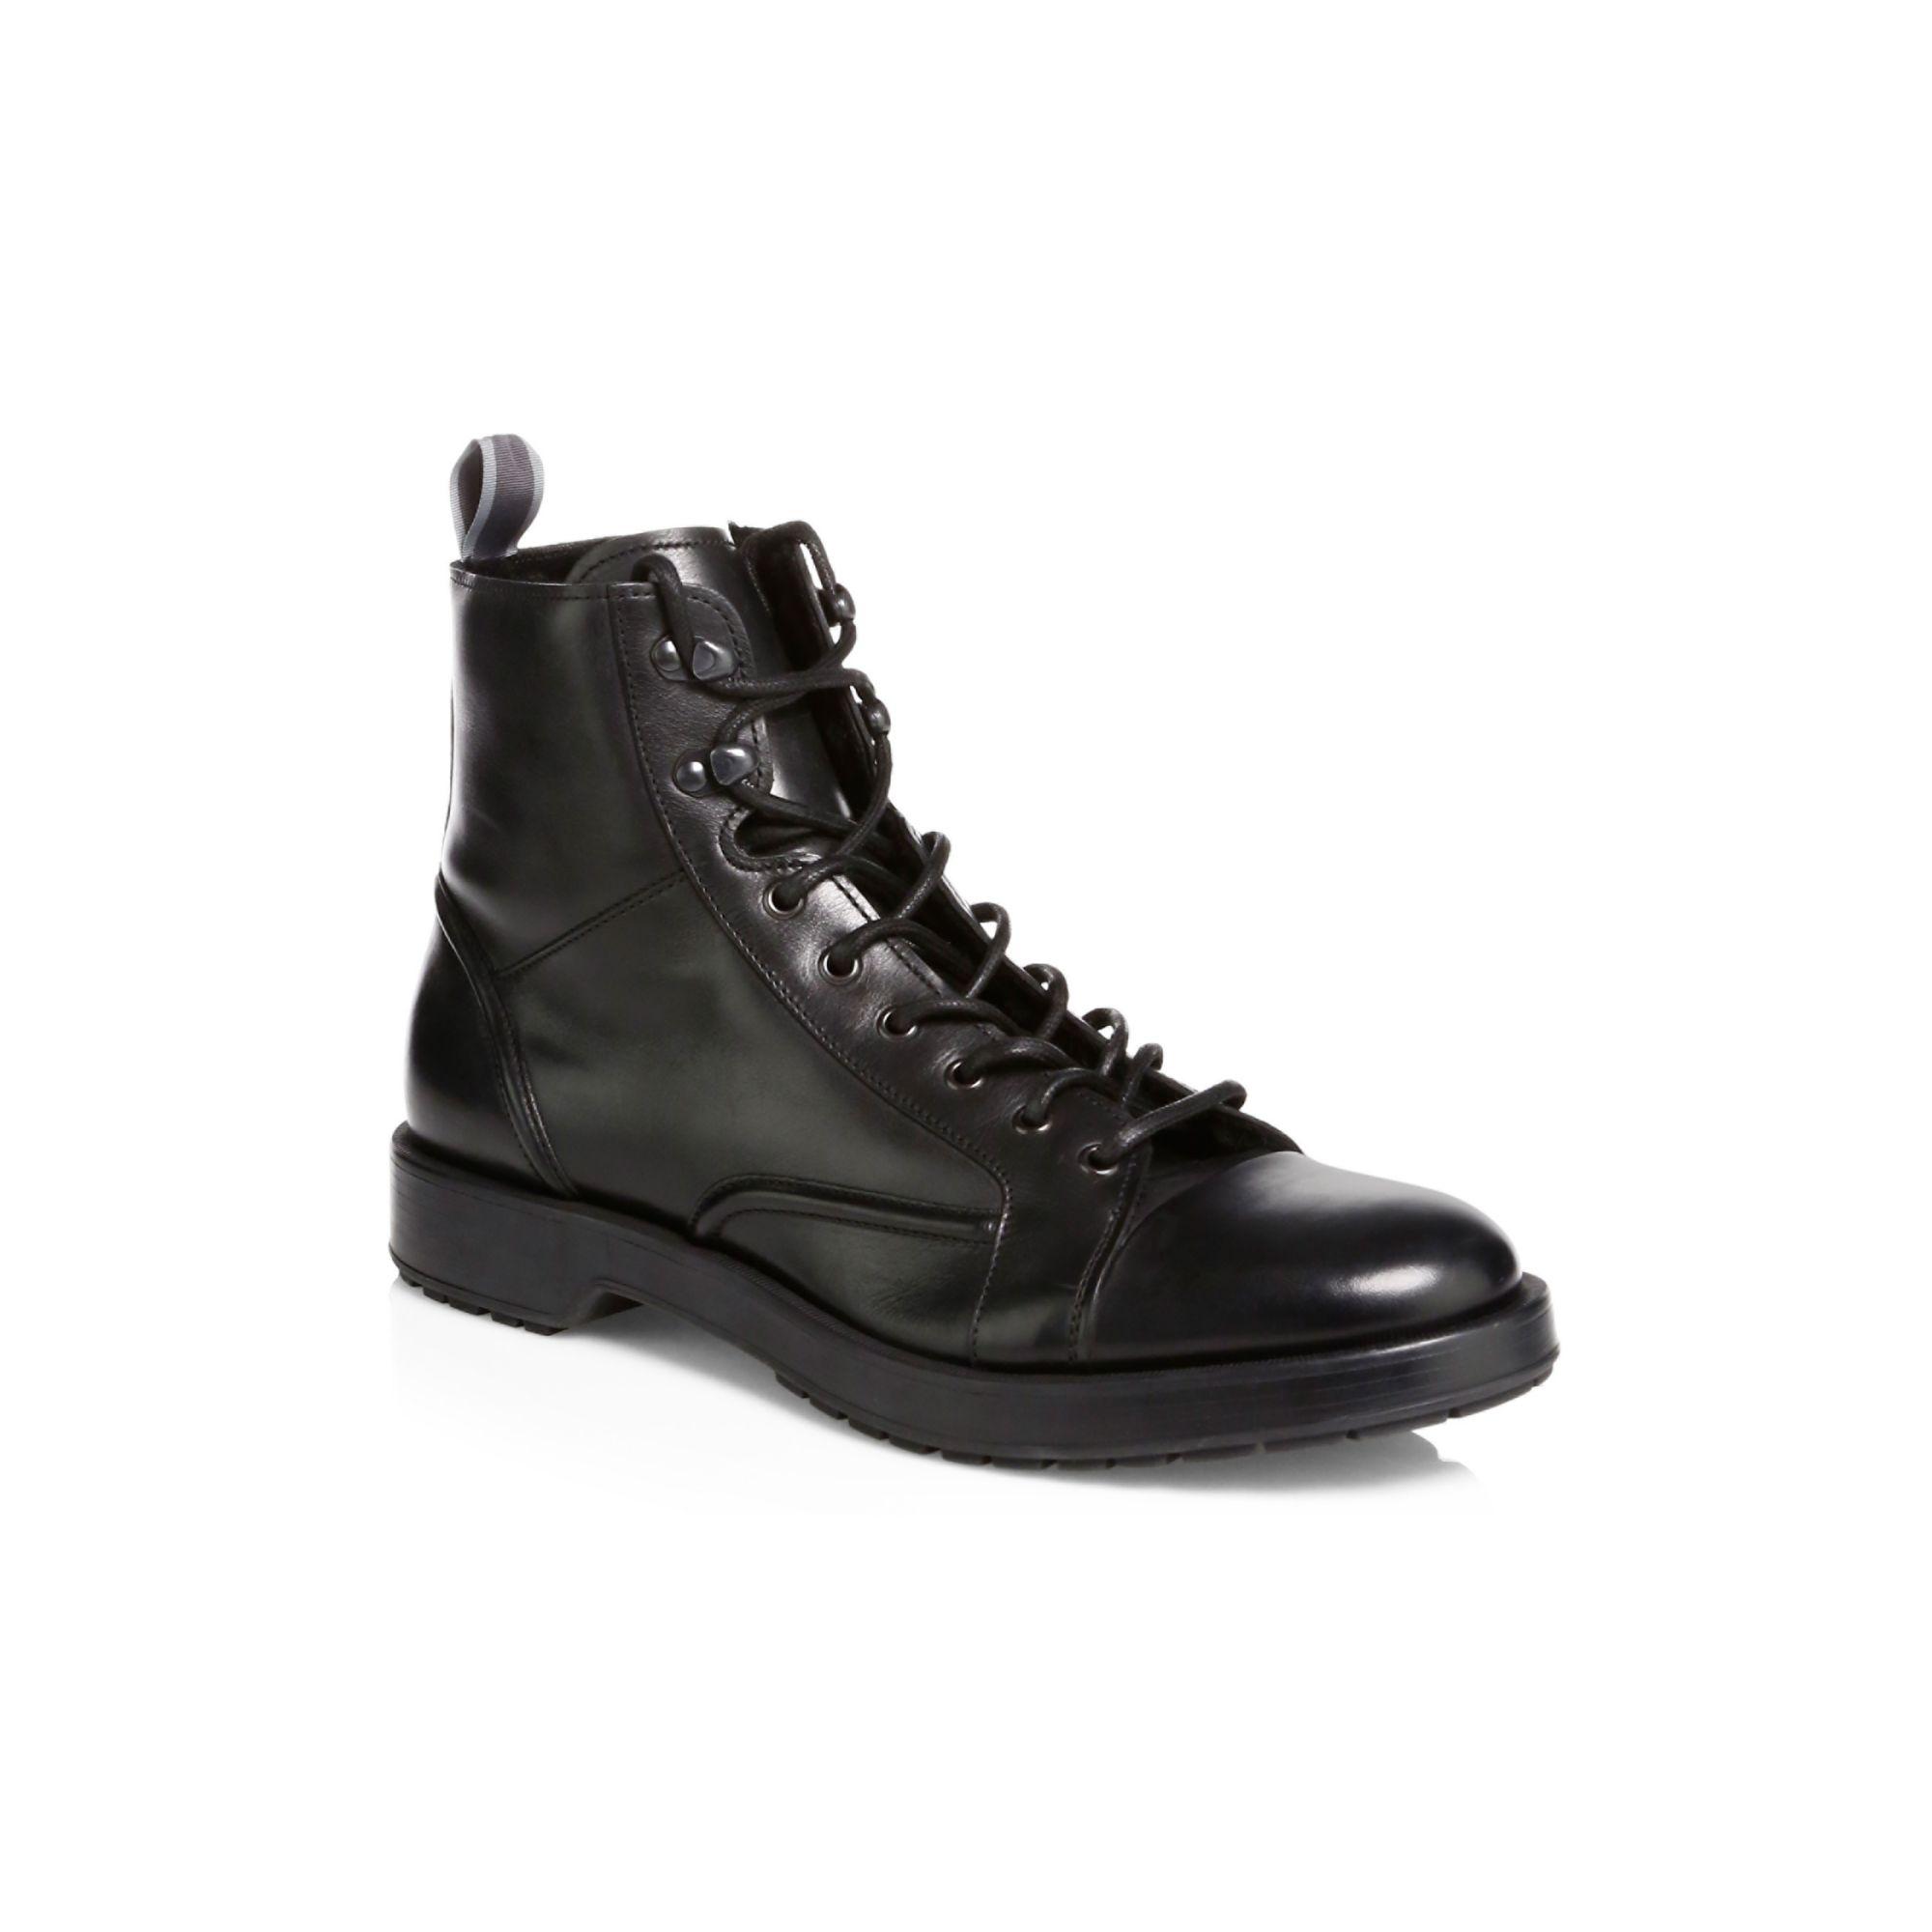 BOSS by HUGO BOSS Montreal Leather Combat Boots in Black for Men - Lyst